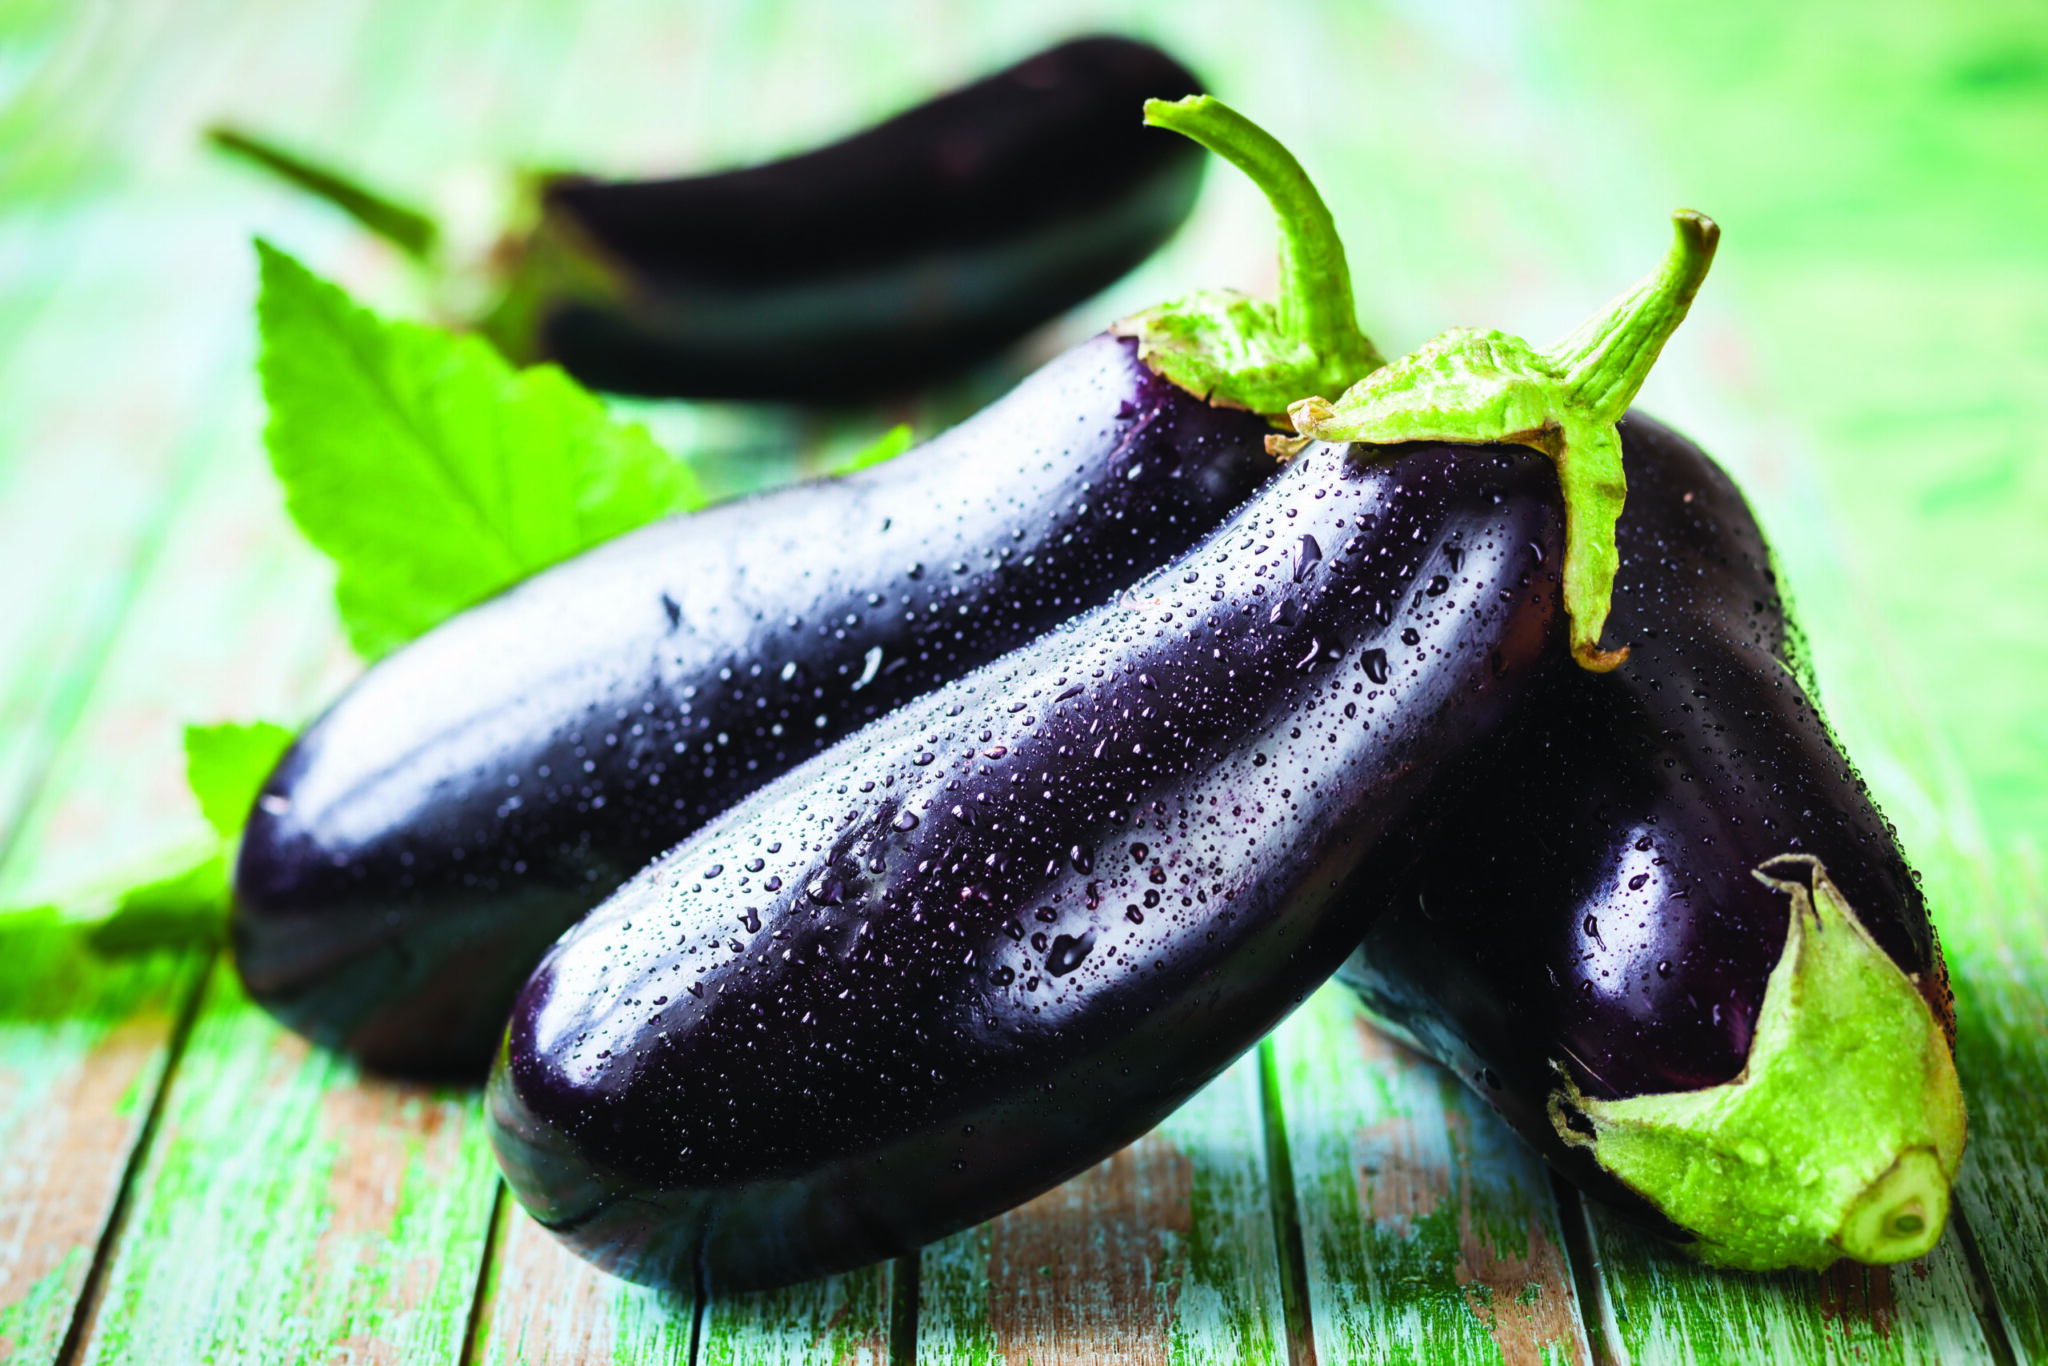 how poisonous is the nightshade family of plants like potatoes peppers eggplants and tomatoes